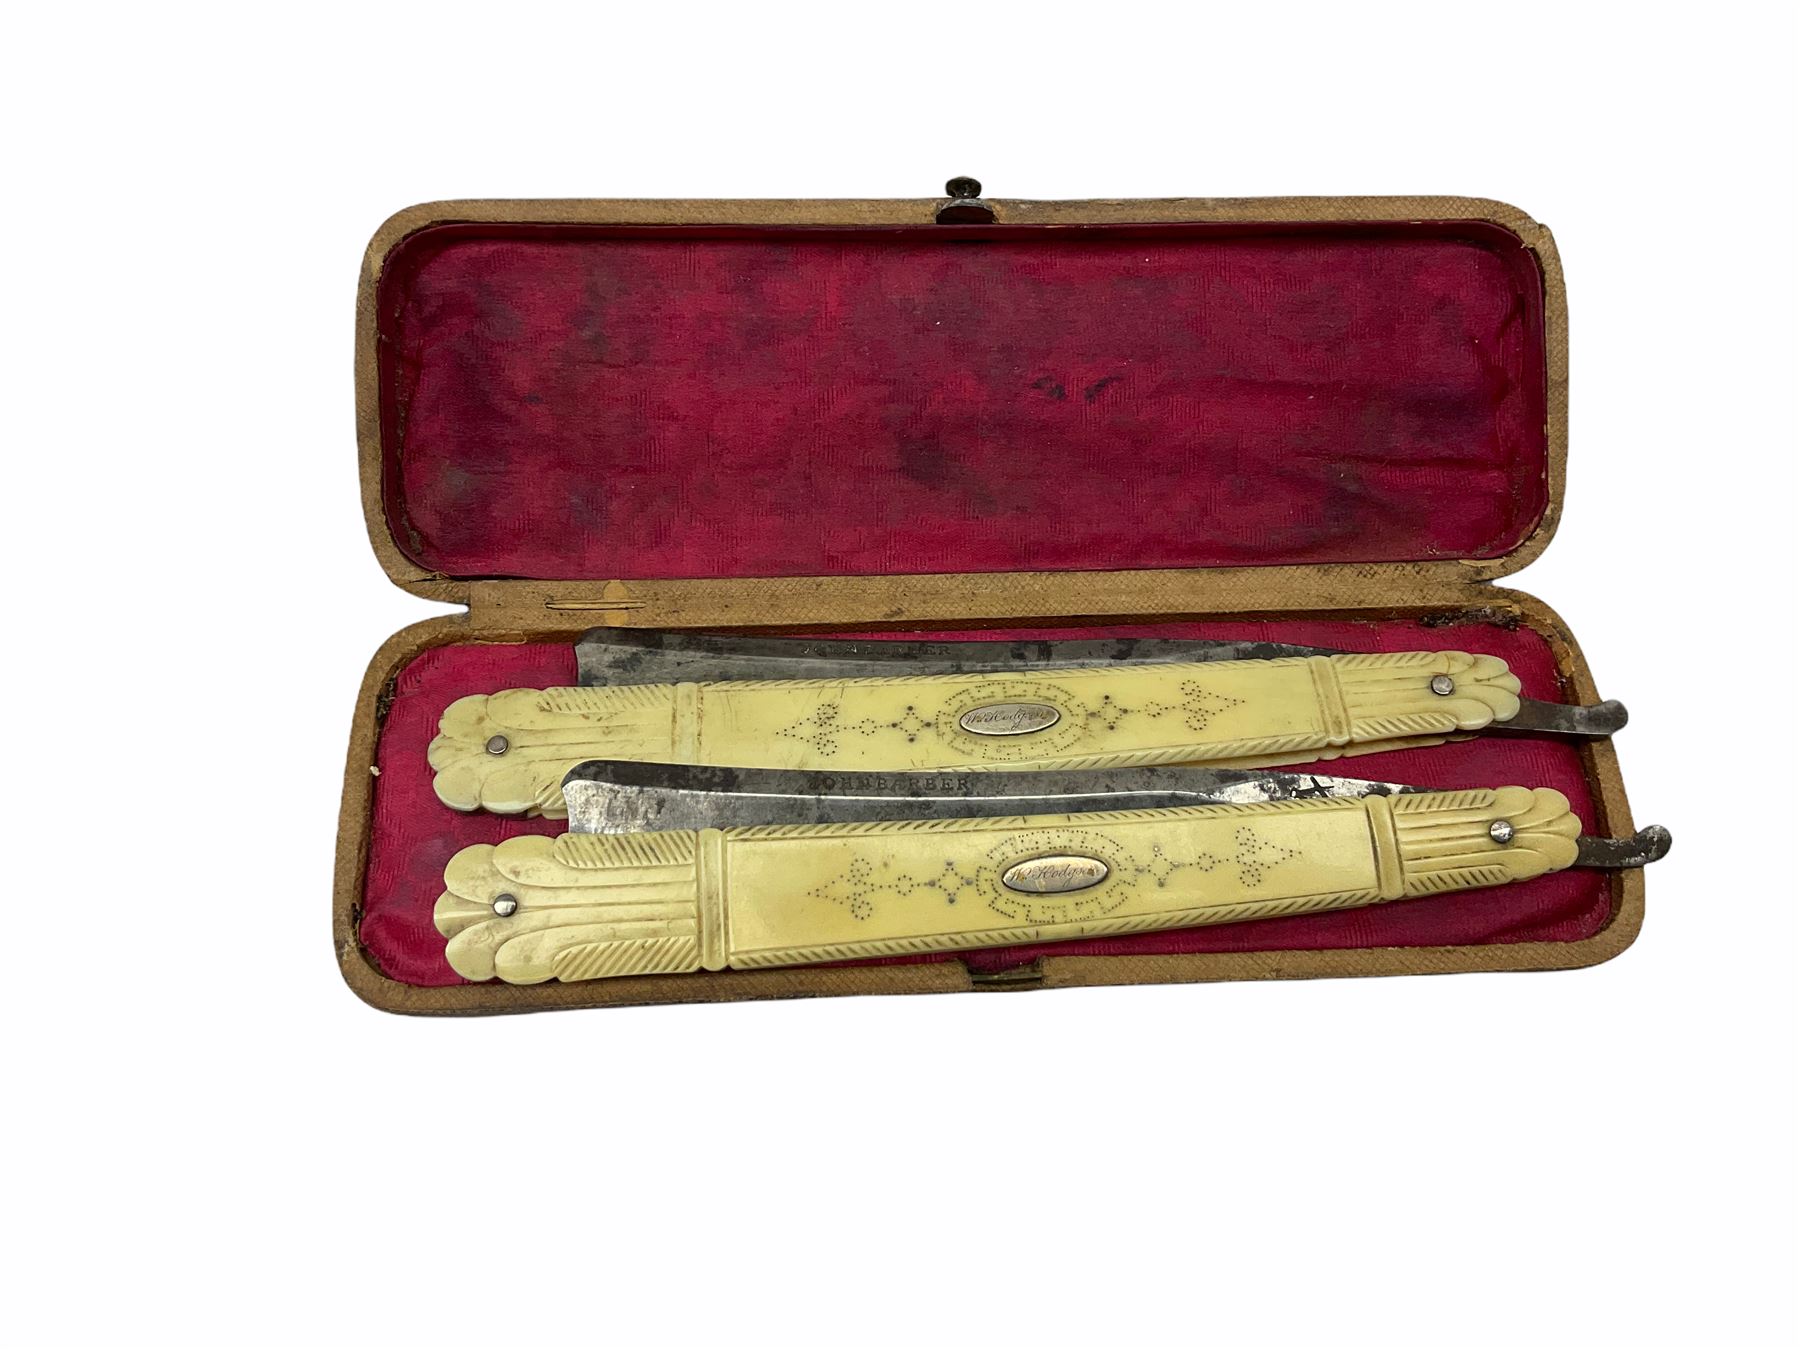 Pair of early 19th century John Barber ivory cut-throat razors with pique work decoration - Image 8 of 10